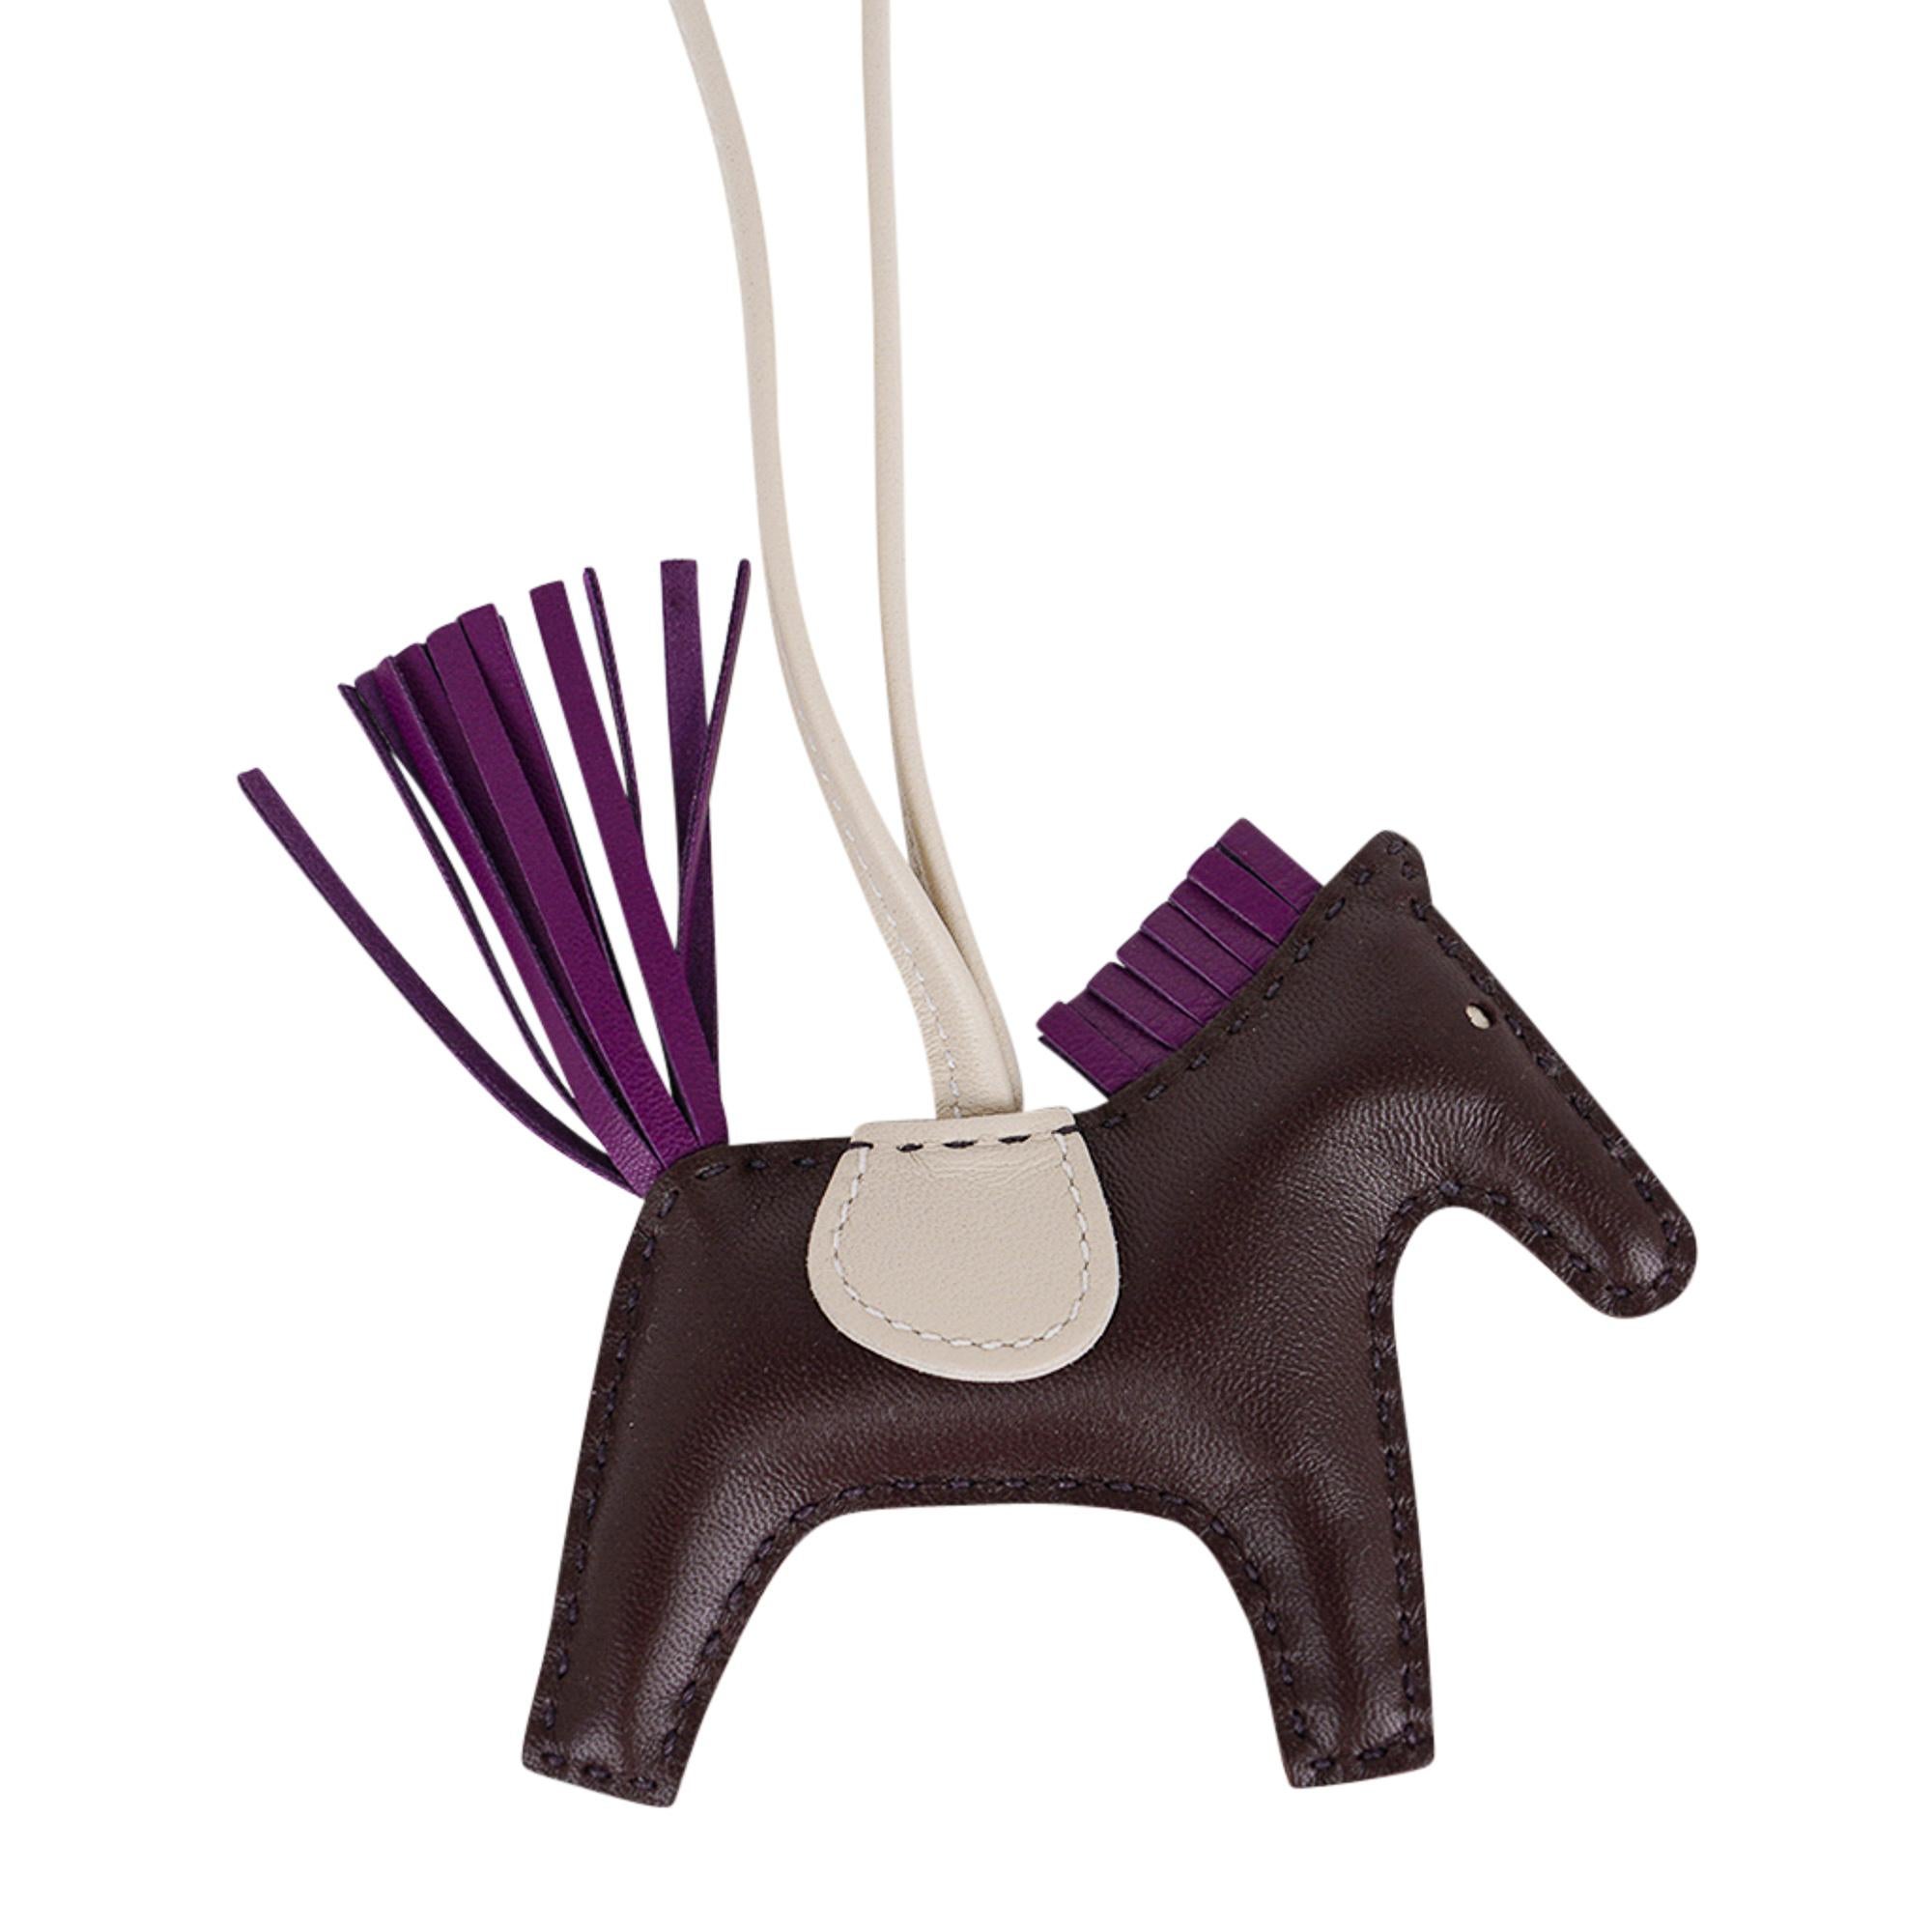 Mightychic offers a guaranteed authentic Hermes Grigri Pegase Rodeo PM featured in Rouge Sellier, Craie and Violet.
Charming and playful she easily adorns a myriad bag colours in your fabulous collection. 
Leather is lambskin Milo.
Signature HERMES